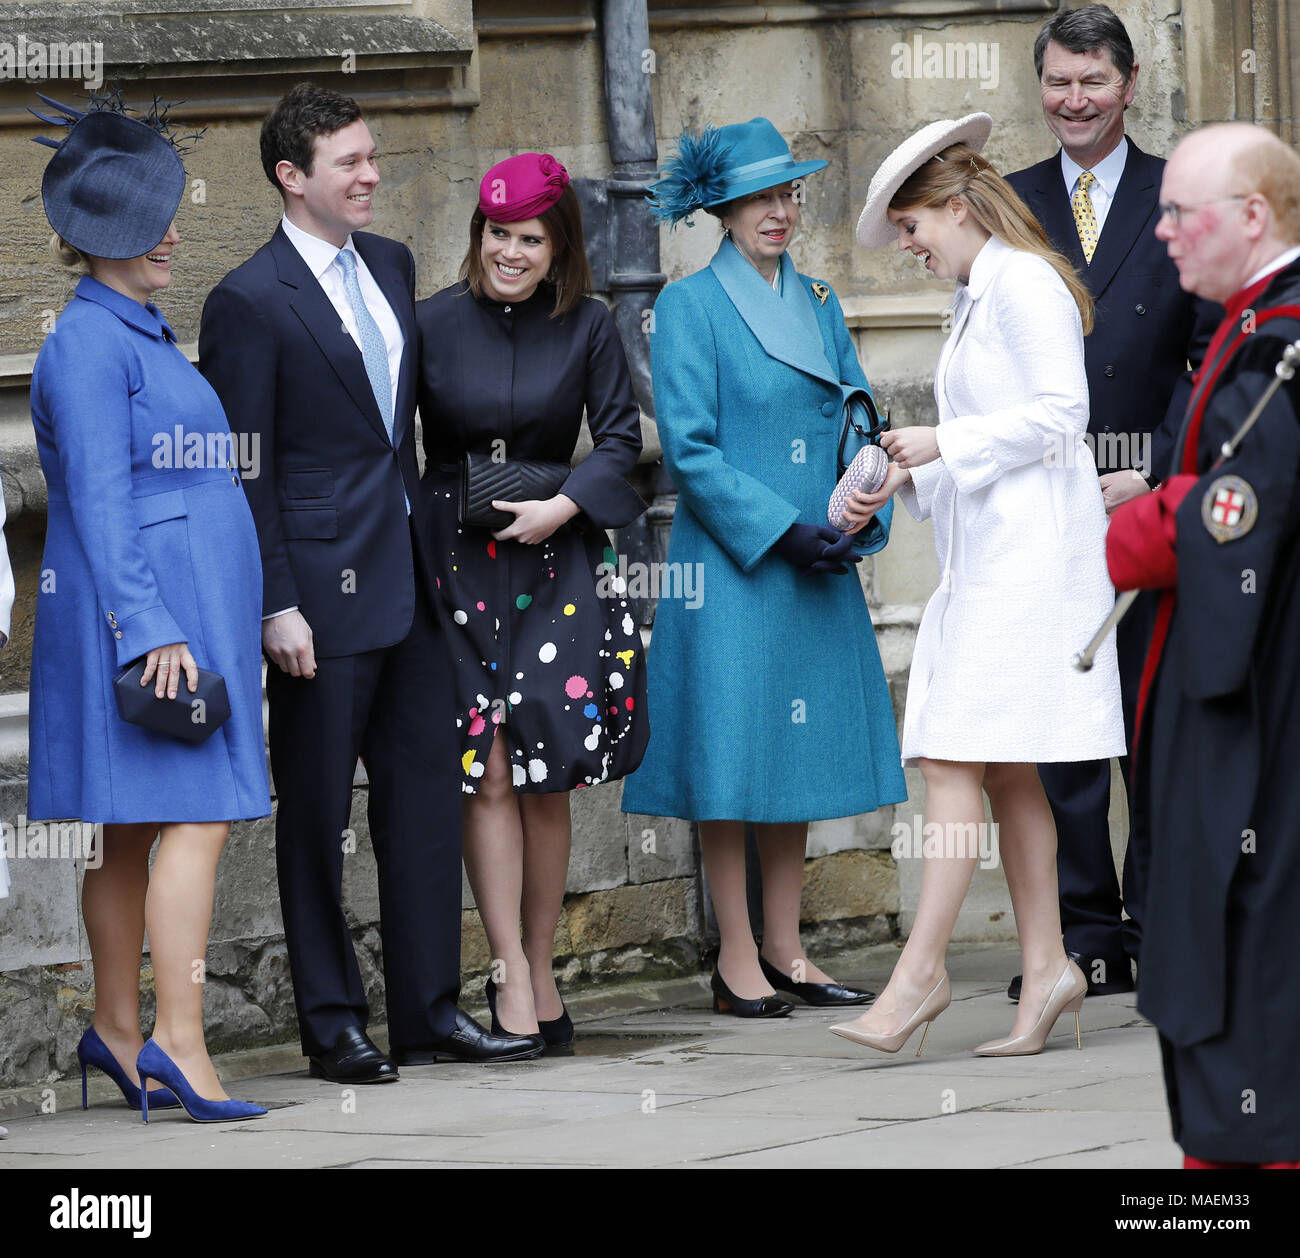 Members of the Royal family, Zara Tindall (left) Princess Eugenie and ...